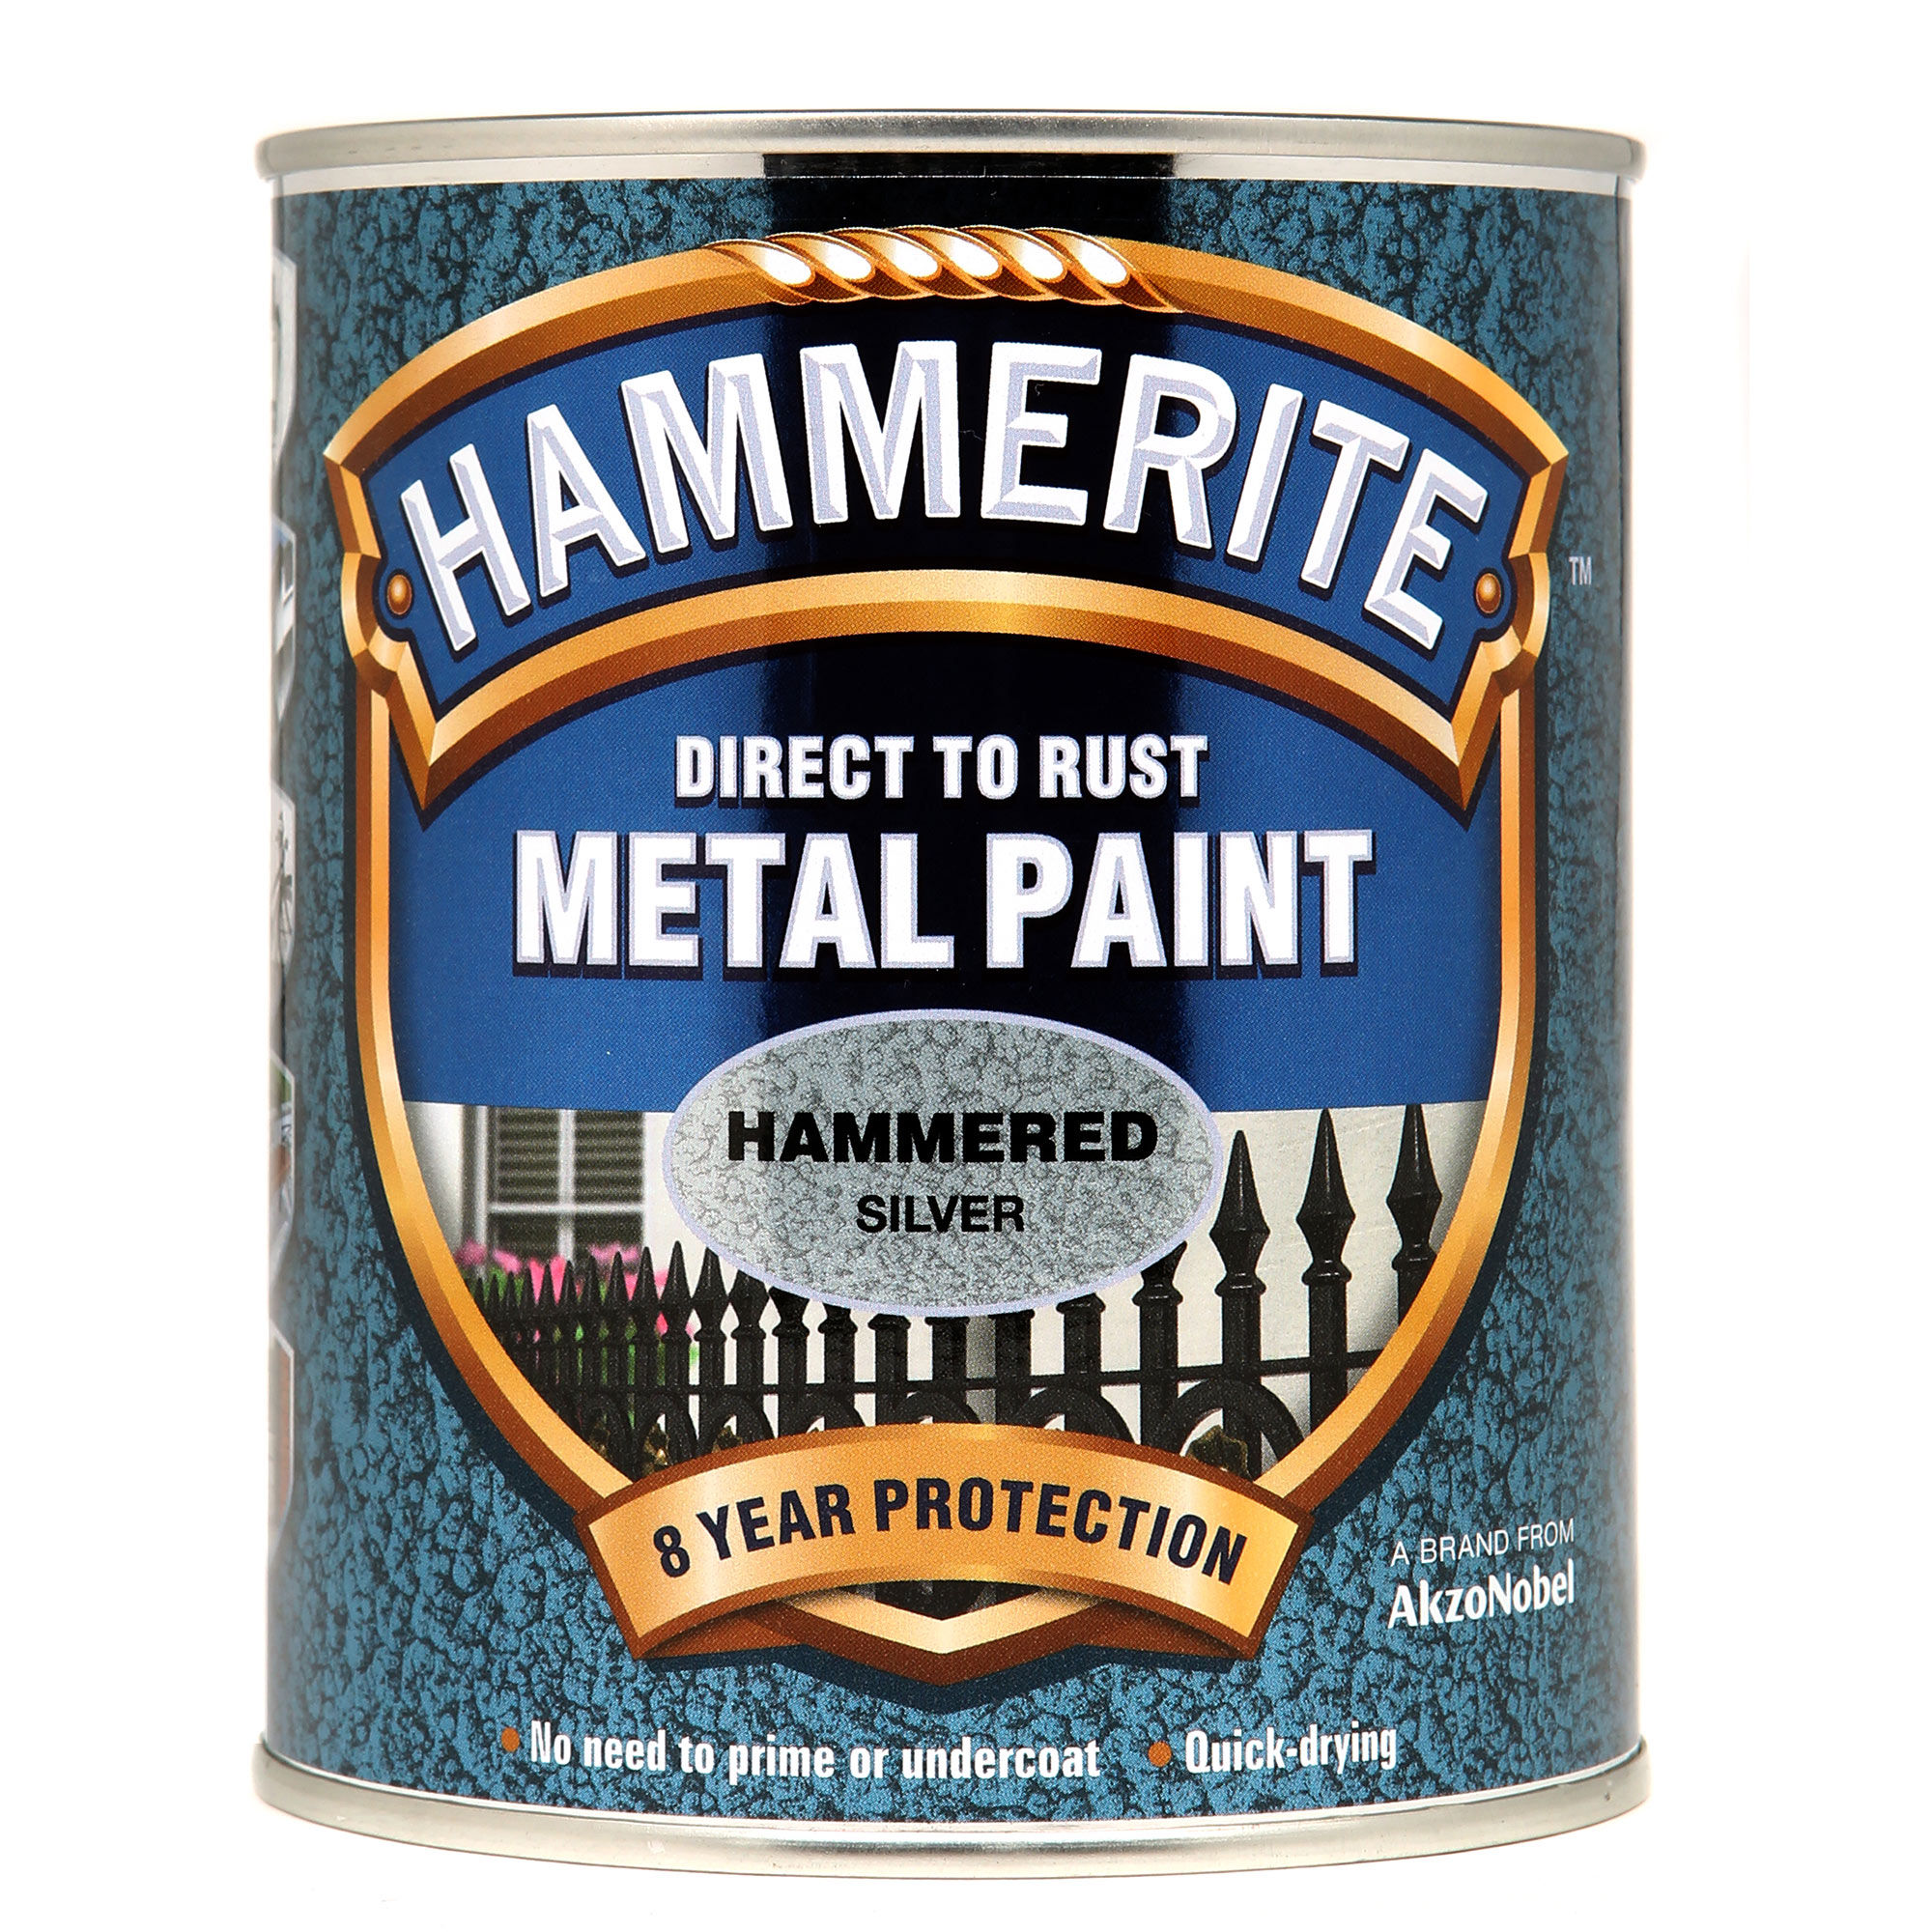 Hammerite Direct to Rust Metal Paint Hammered Finish Silver